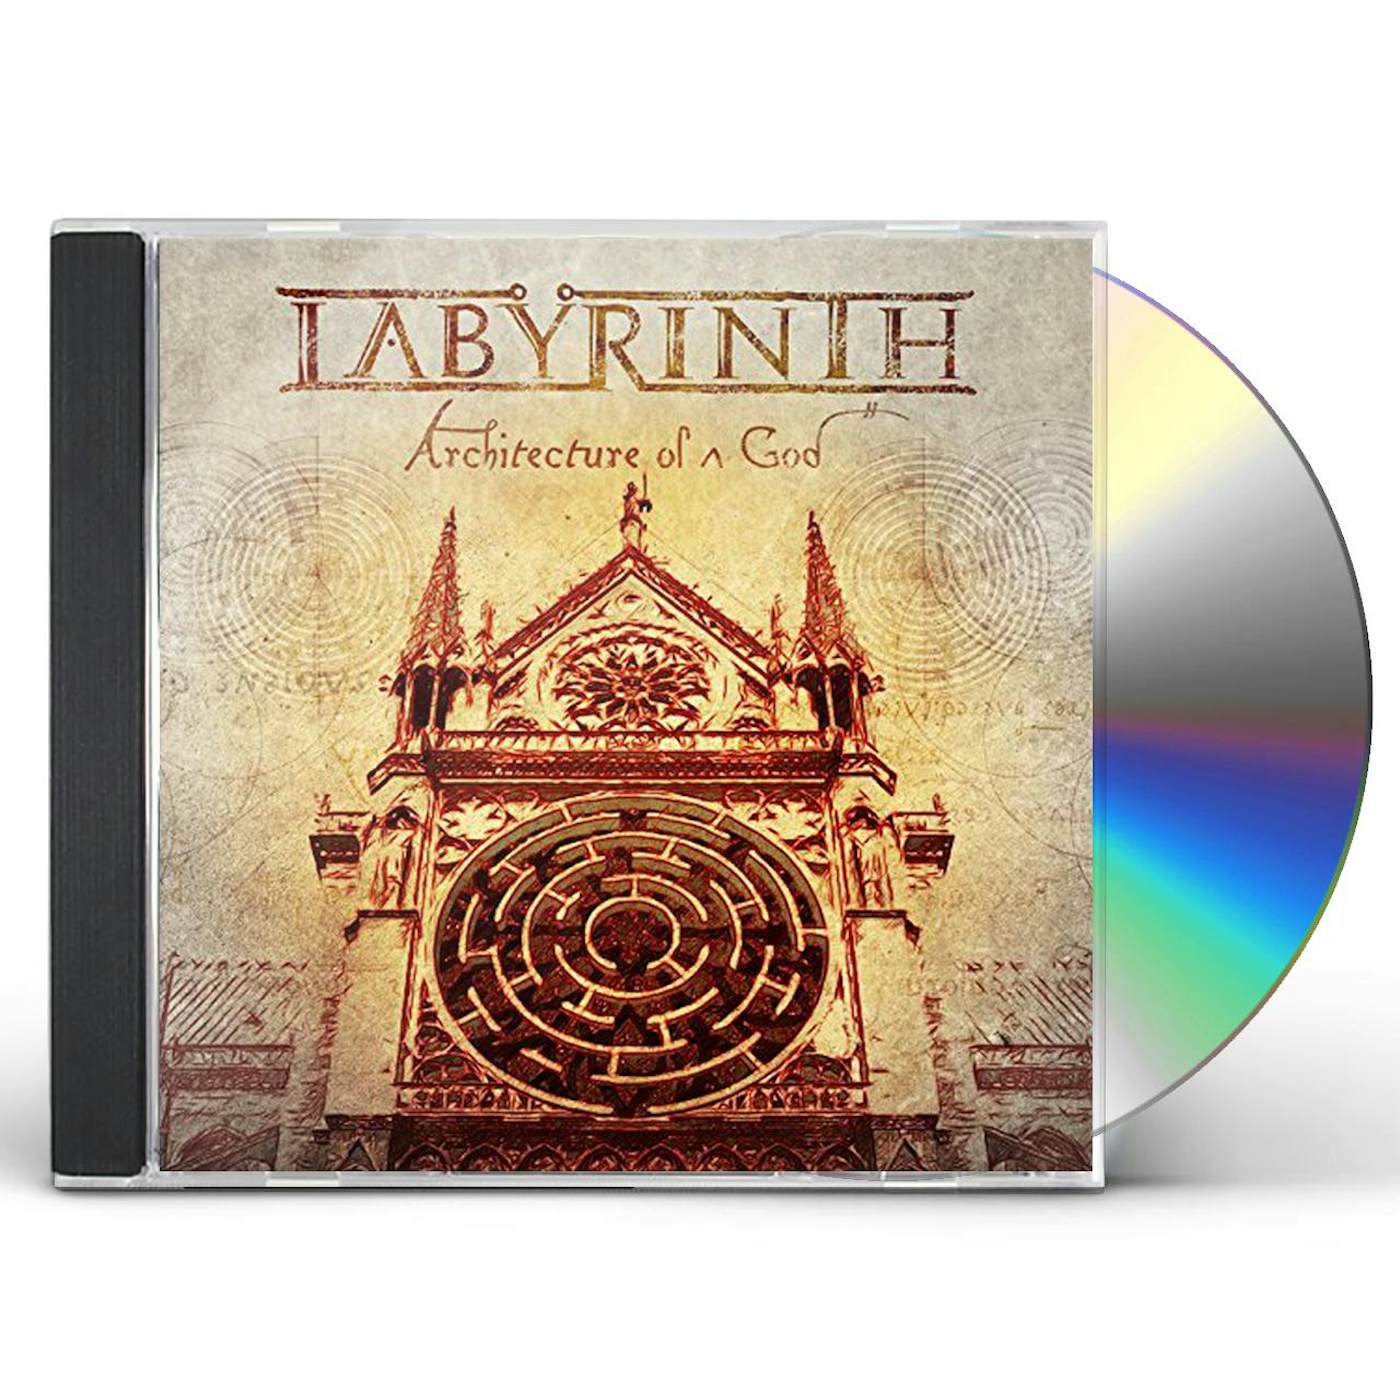 Labyrinth ARCHITECTURE OF A GOD CD